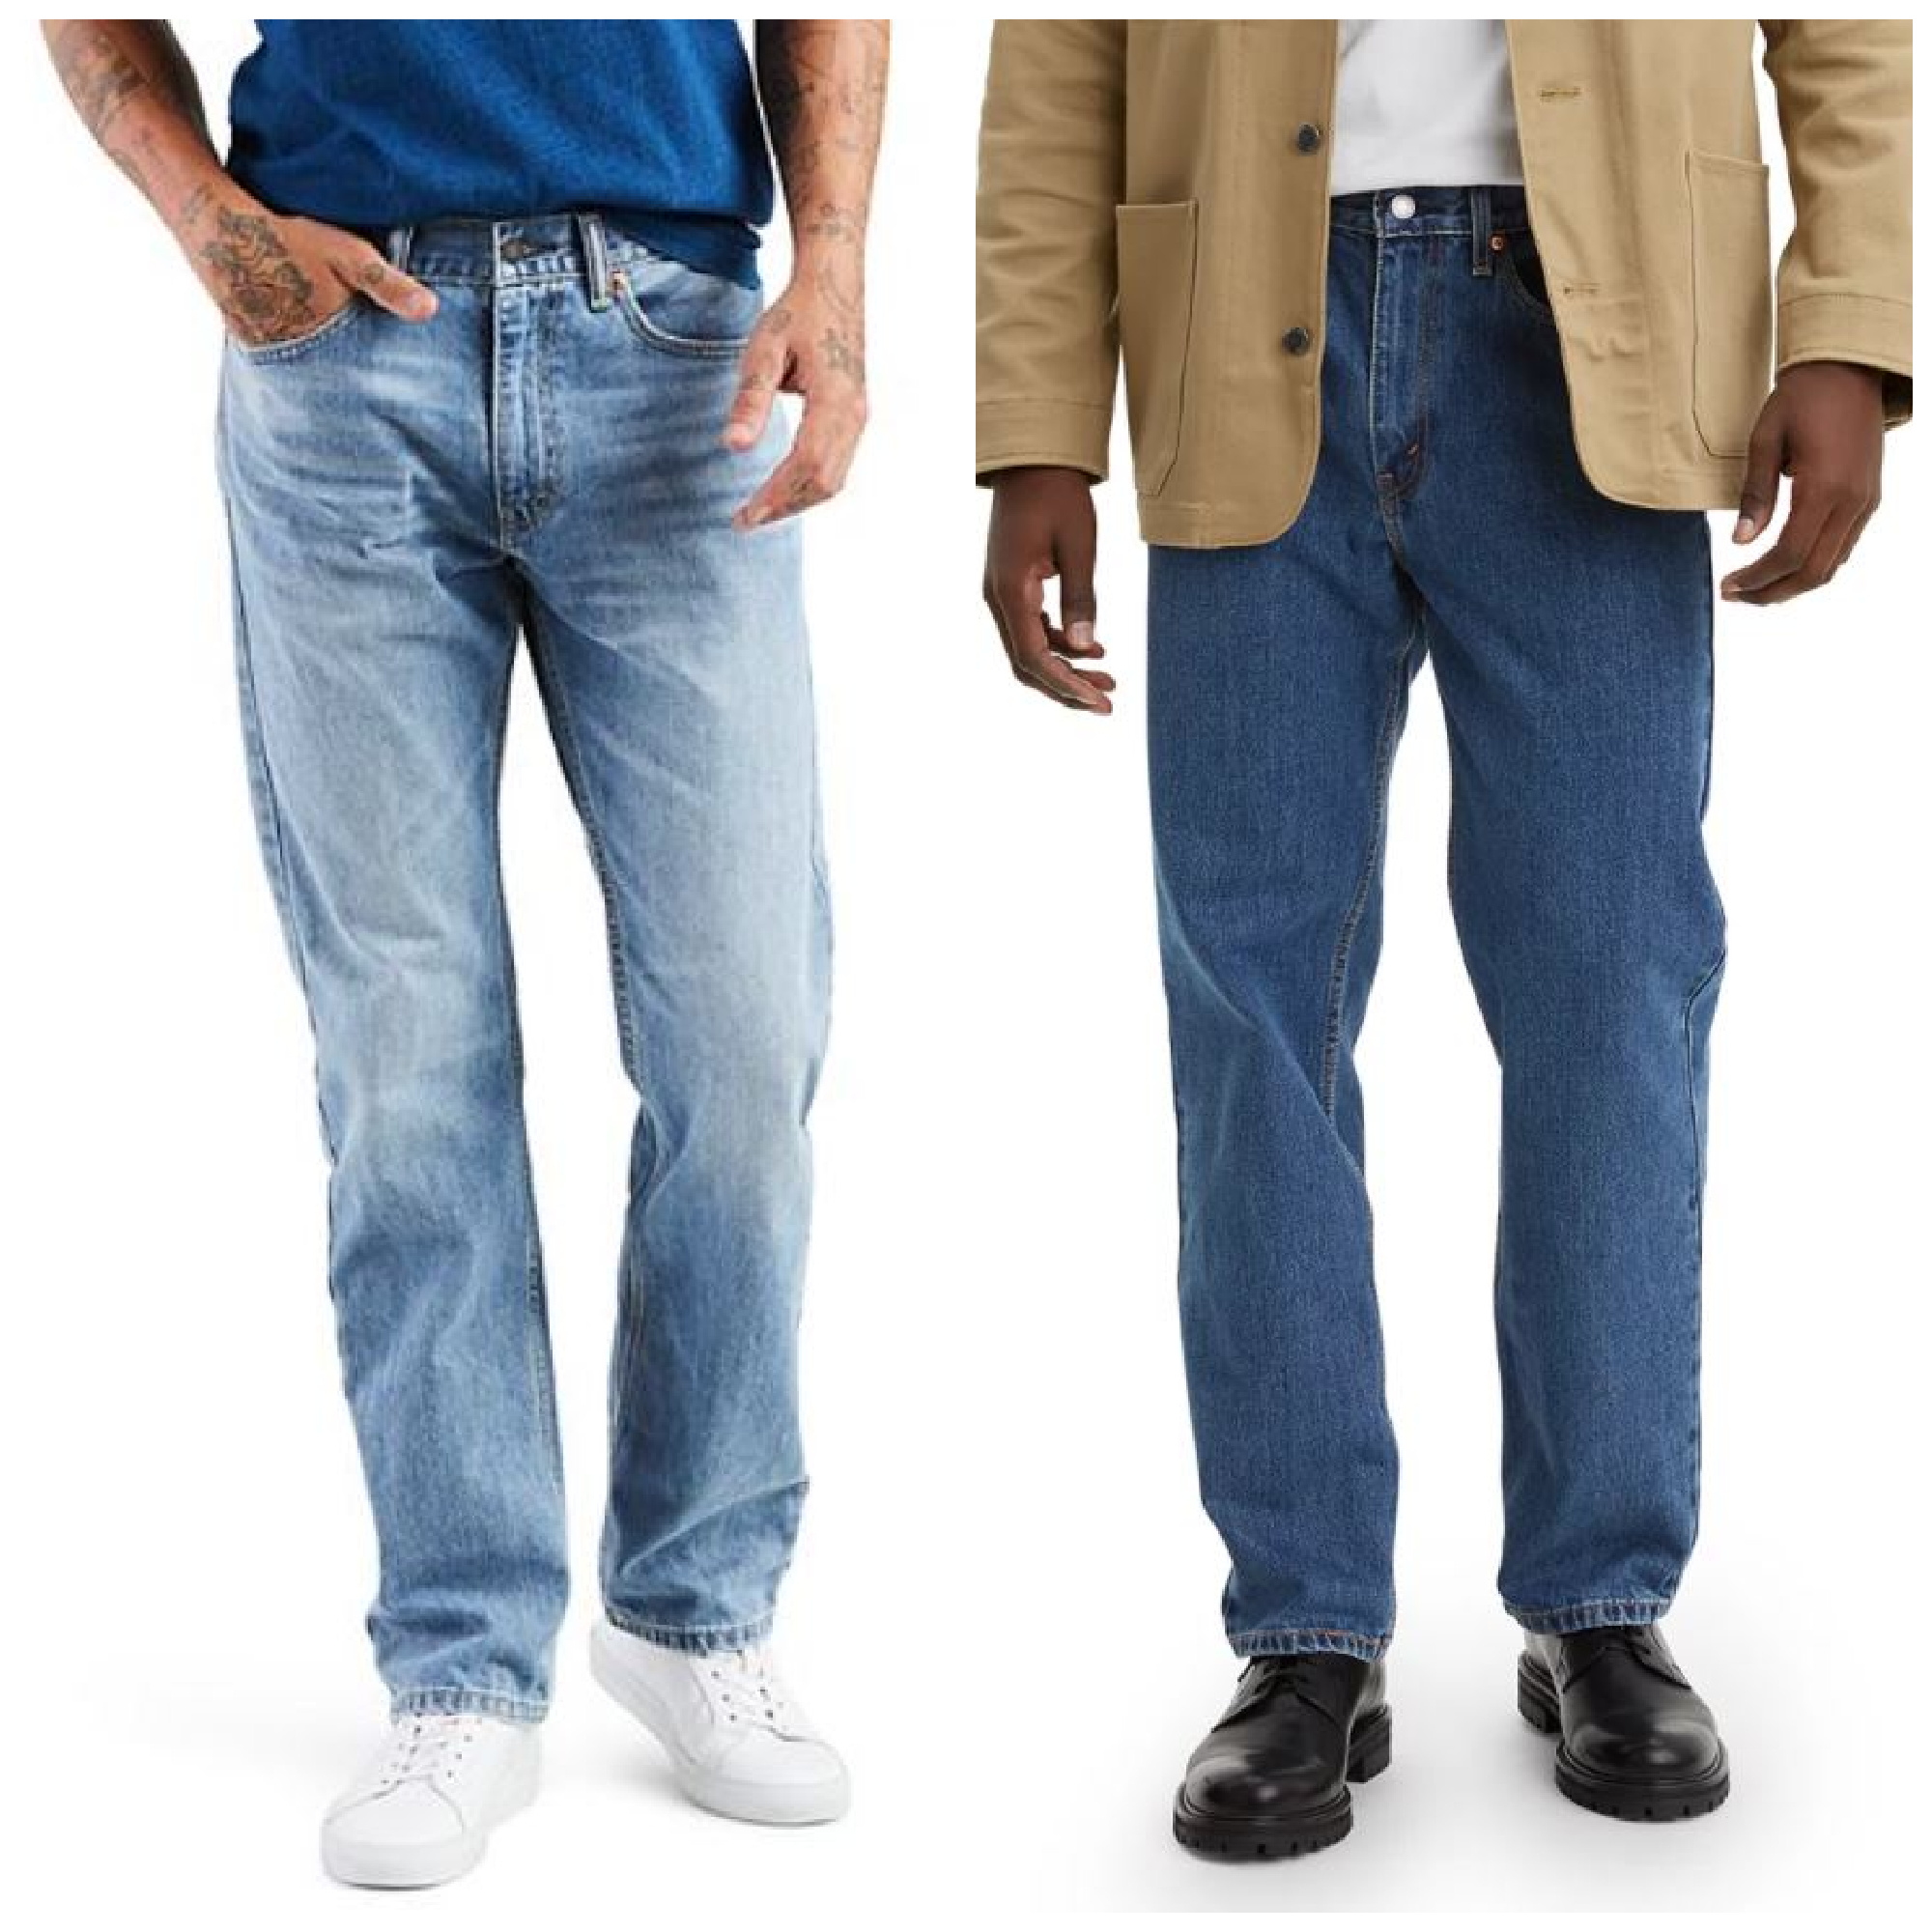 Kohl’s: Levi’s Men’s Jeans on Sale for as low as $41.65!